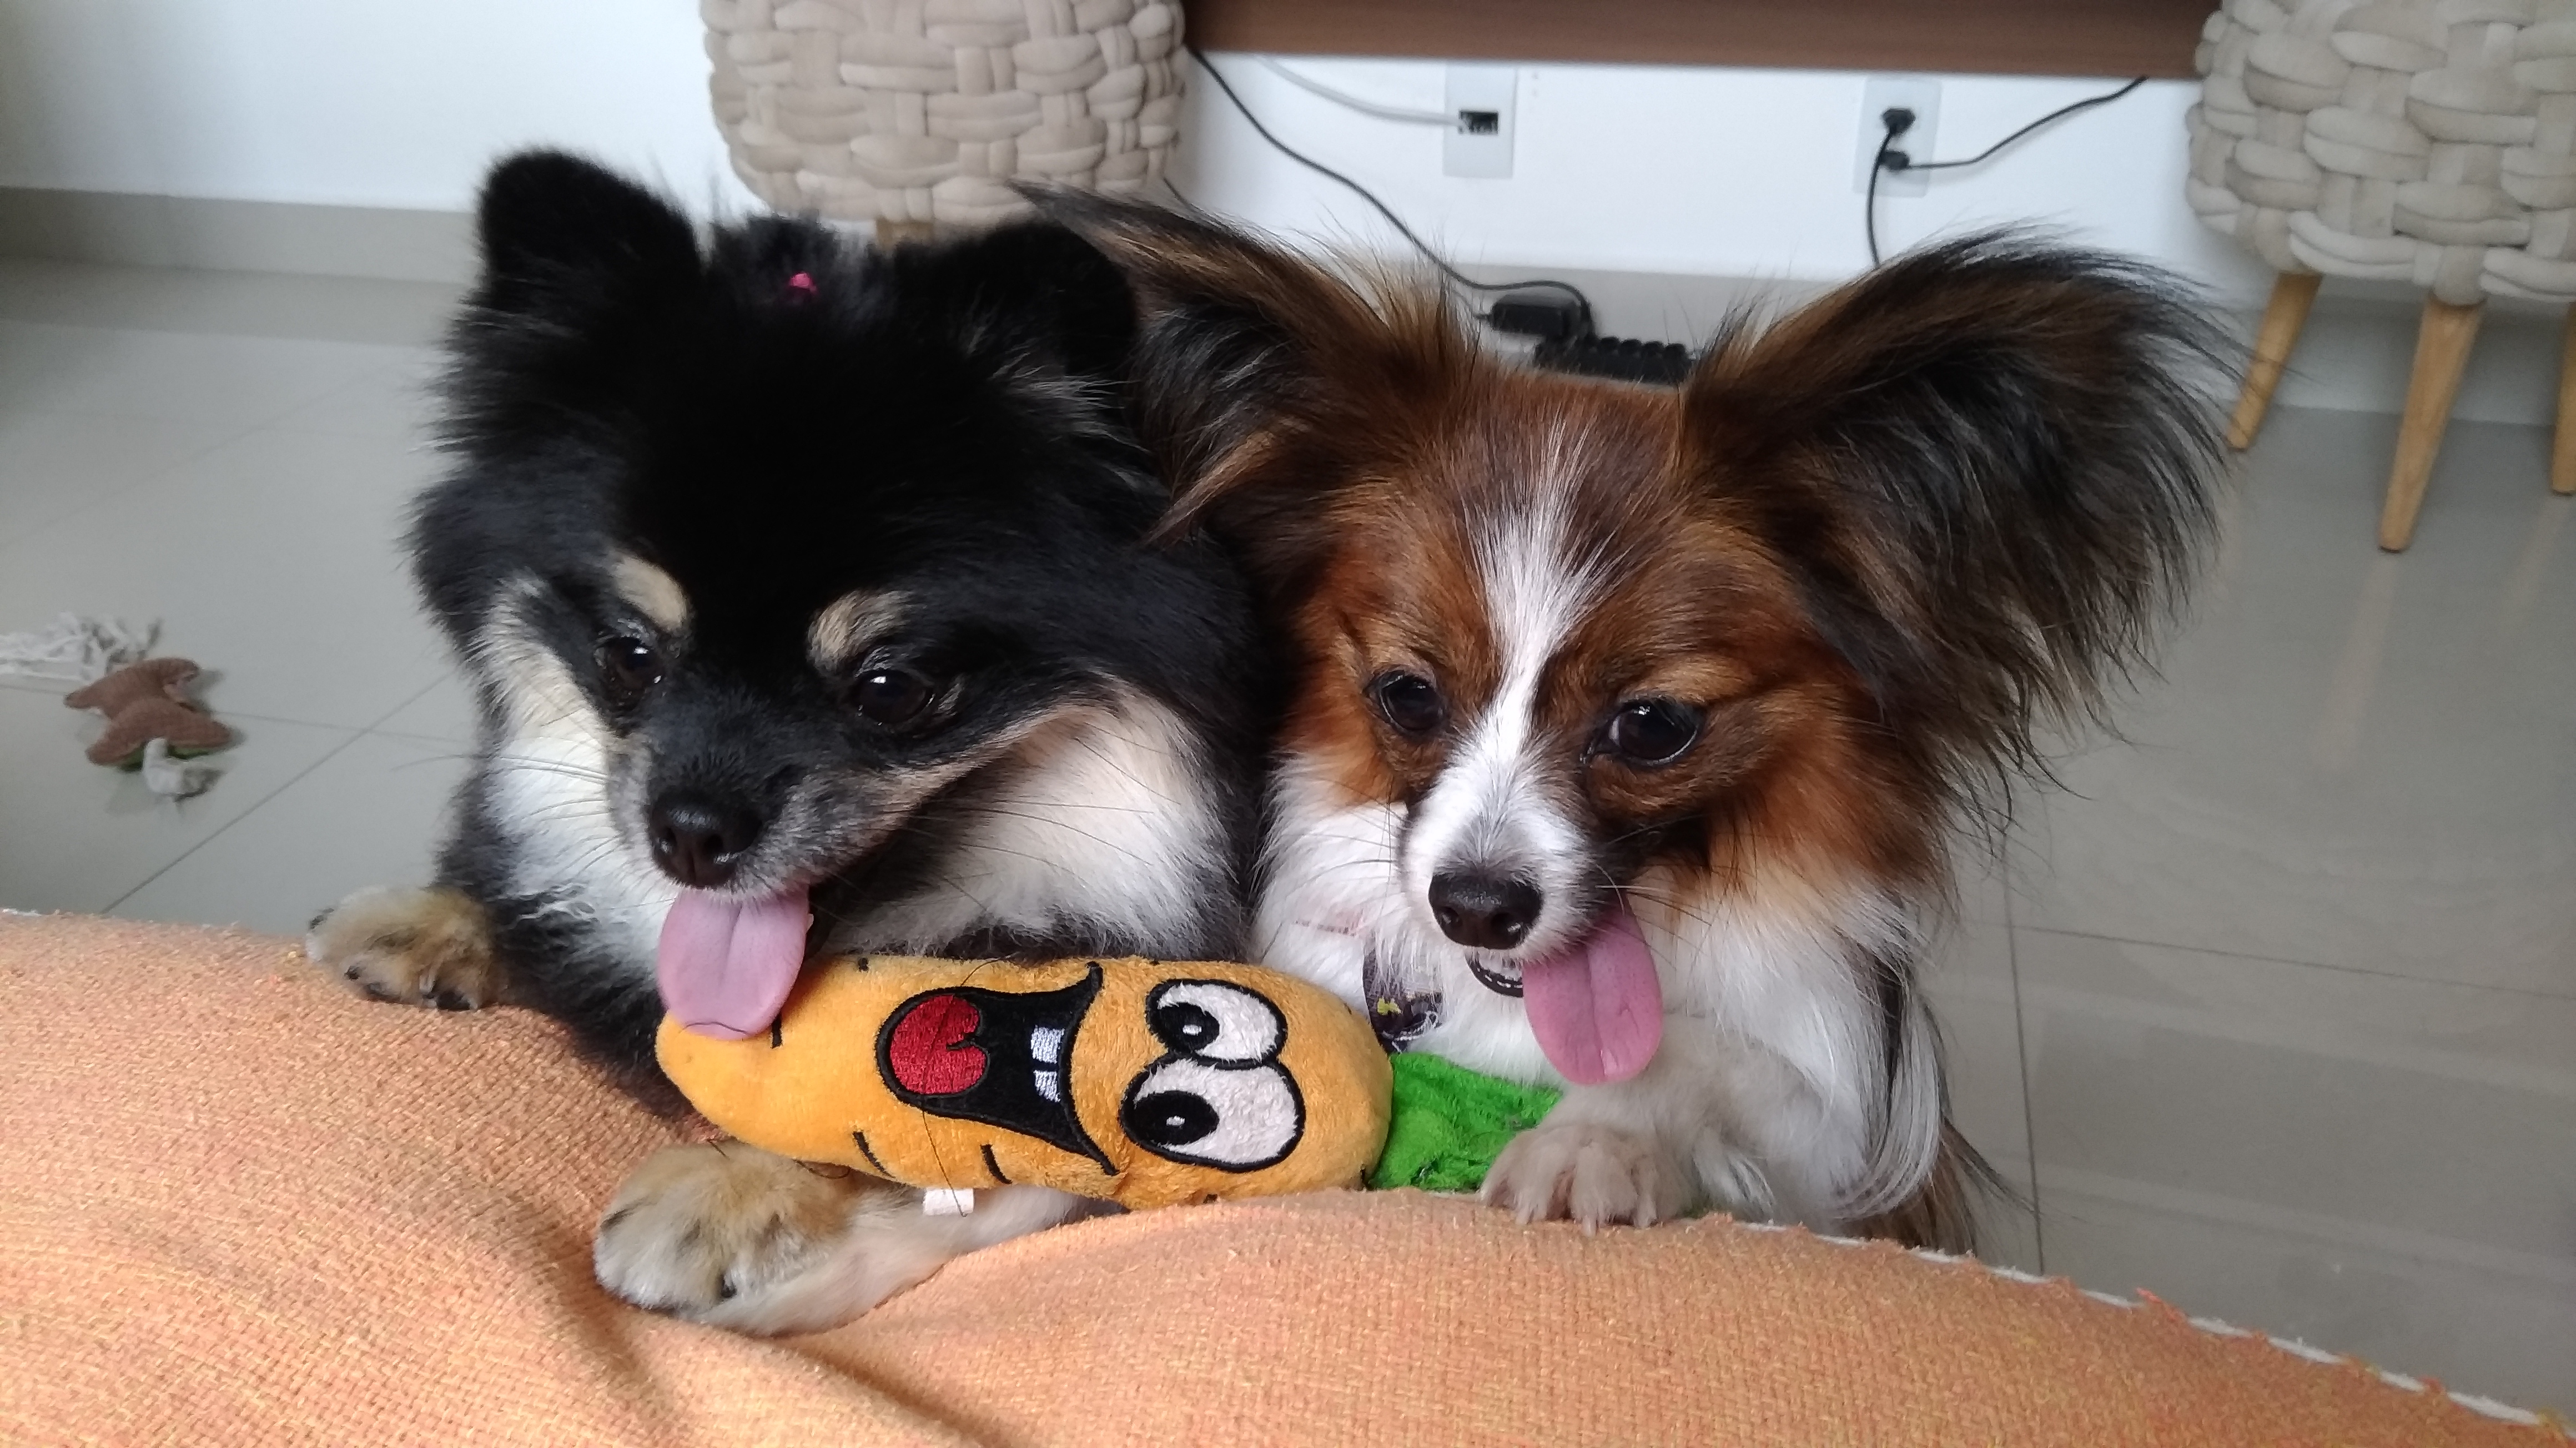 Image with two dogs, one being of the German Spitz breed and the other of the Papillon breed